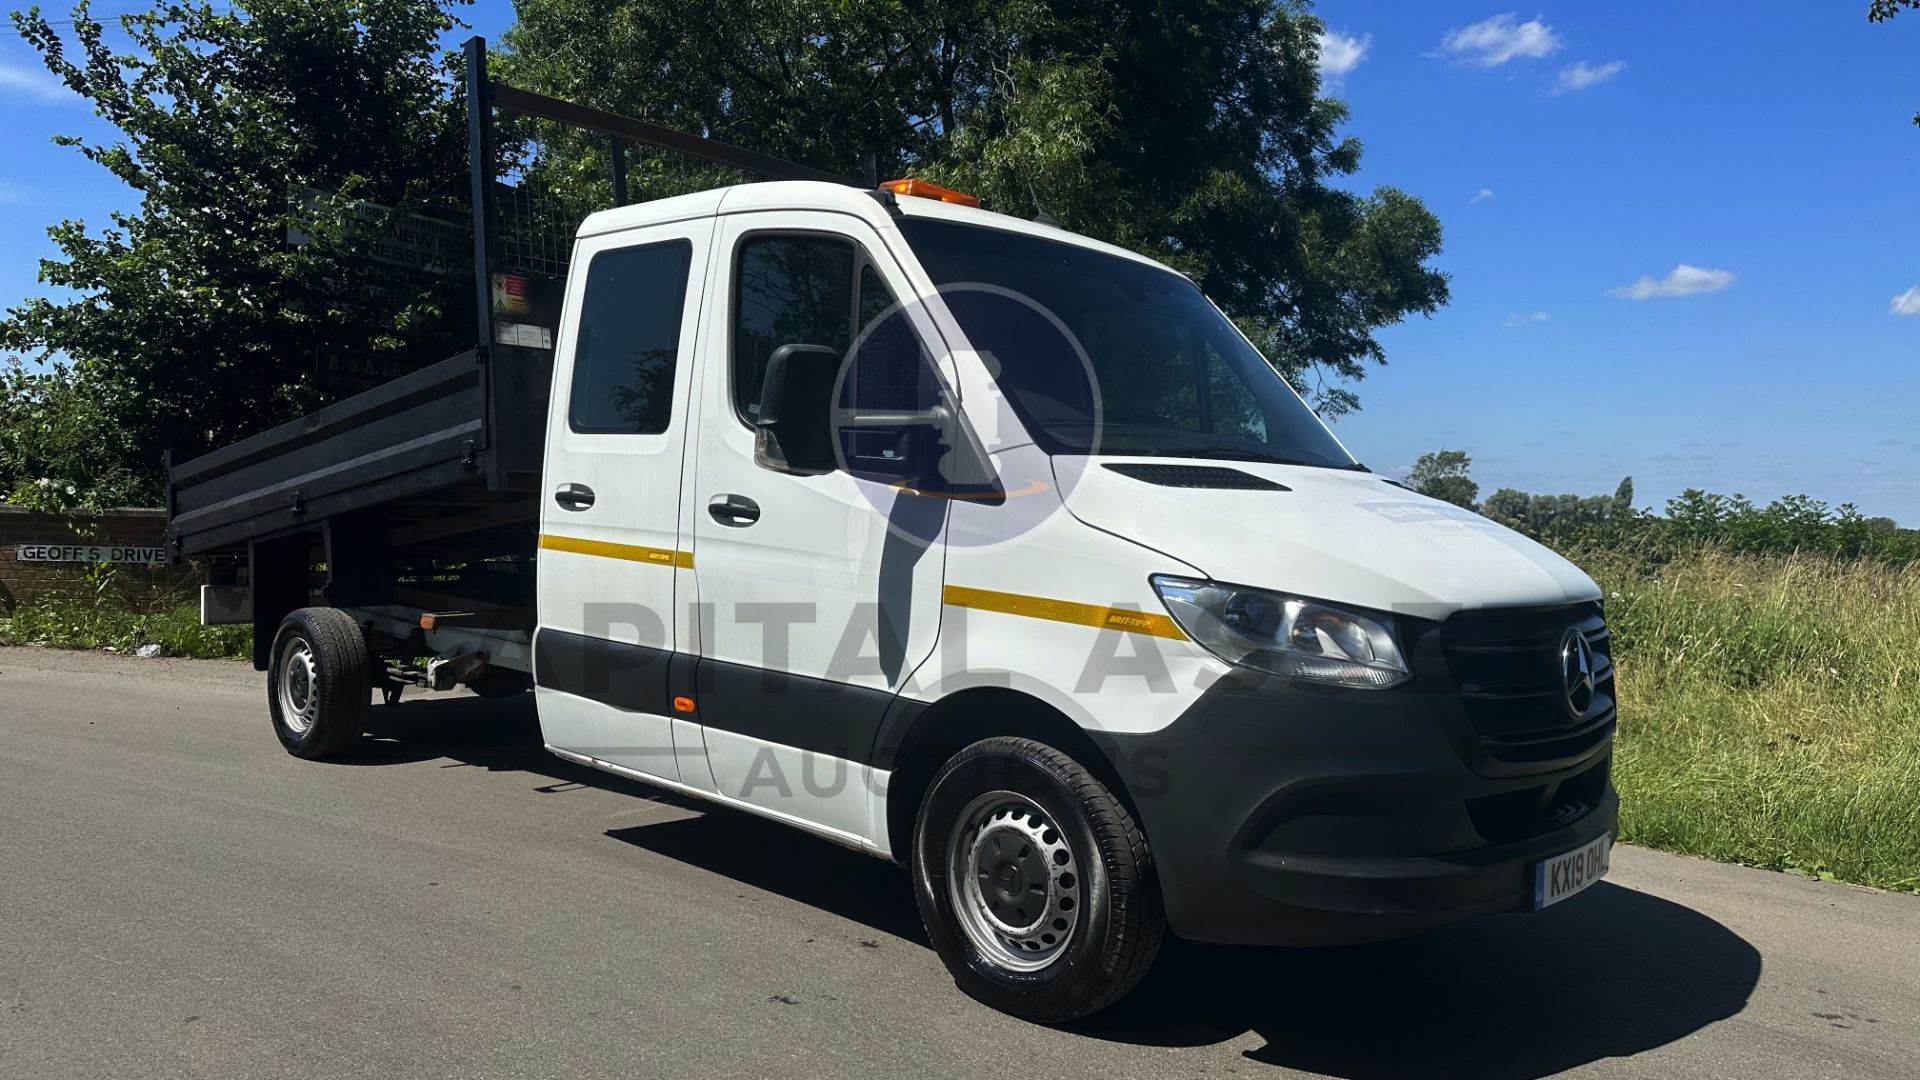 (ON SALE) MERCEDES-BENZ SPRINTER 314 CDI *LWB - UTILITY D/CAB TIPPER* (2019 - NEW MODEL) (57K ONLY) - Image 3 of 37